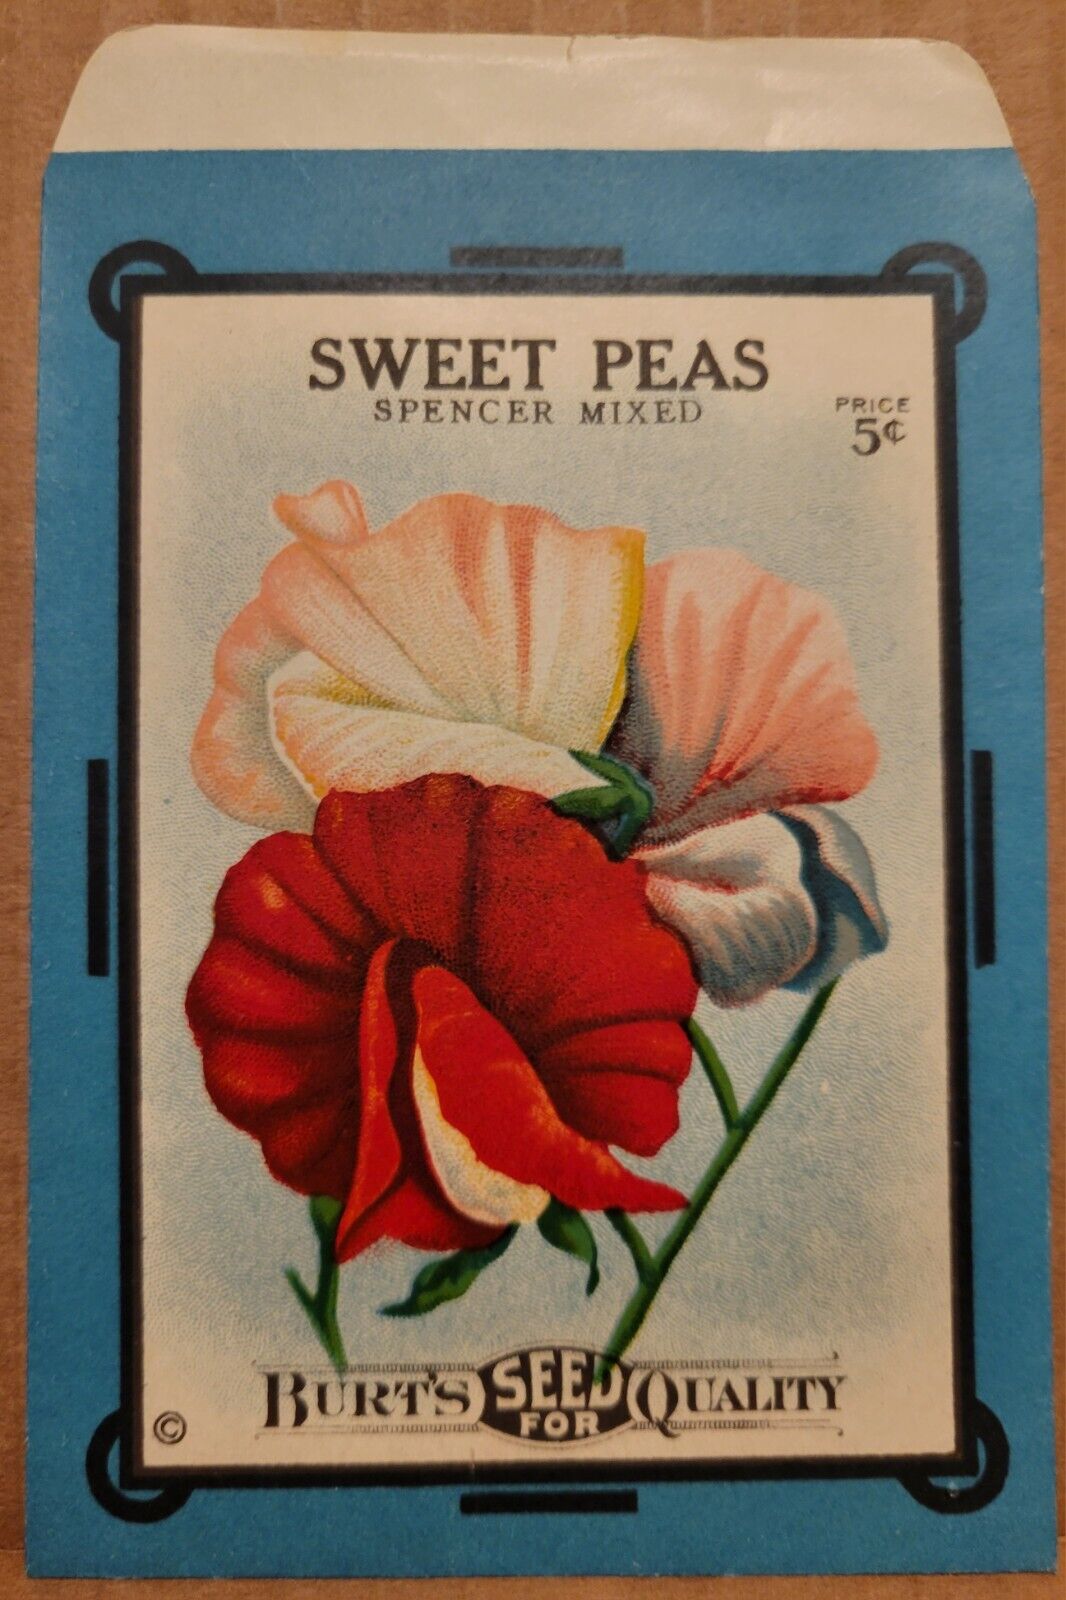 BURTS SEED PACK SPENCER SWEET PEAS Vintage Litho 5 Cents Mixed Flower C 1910s